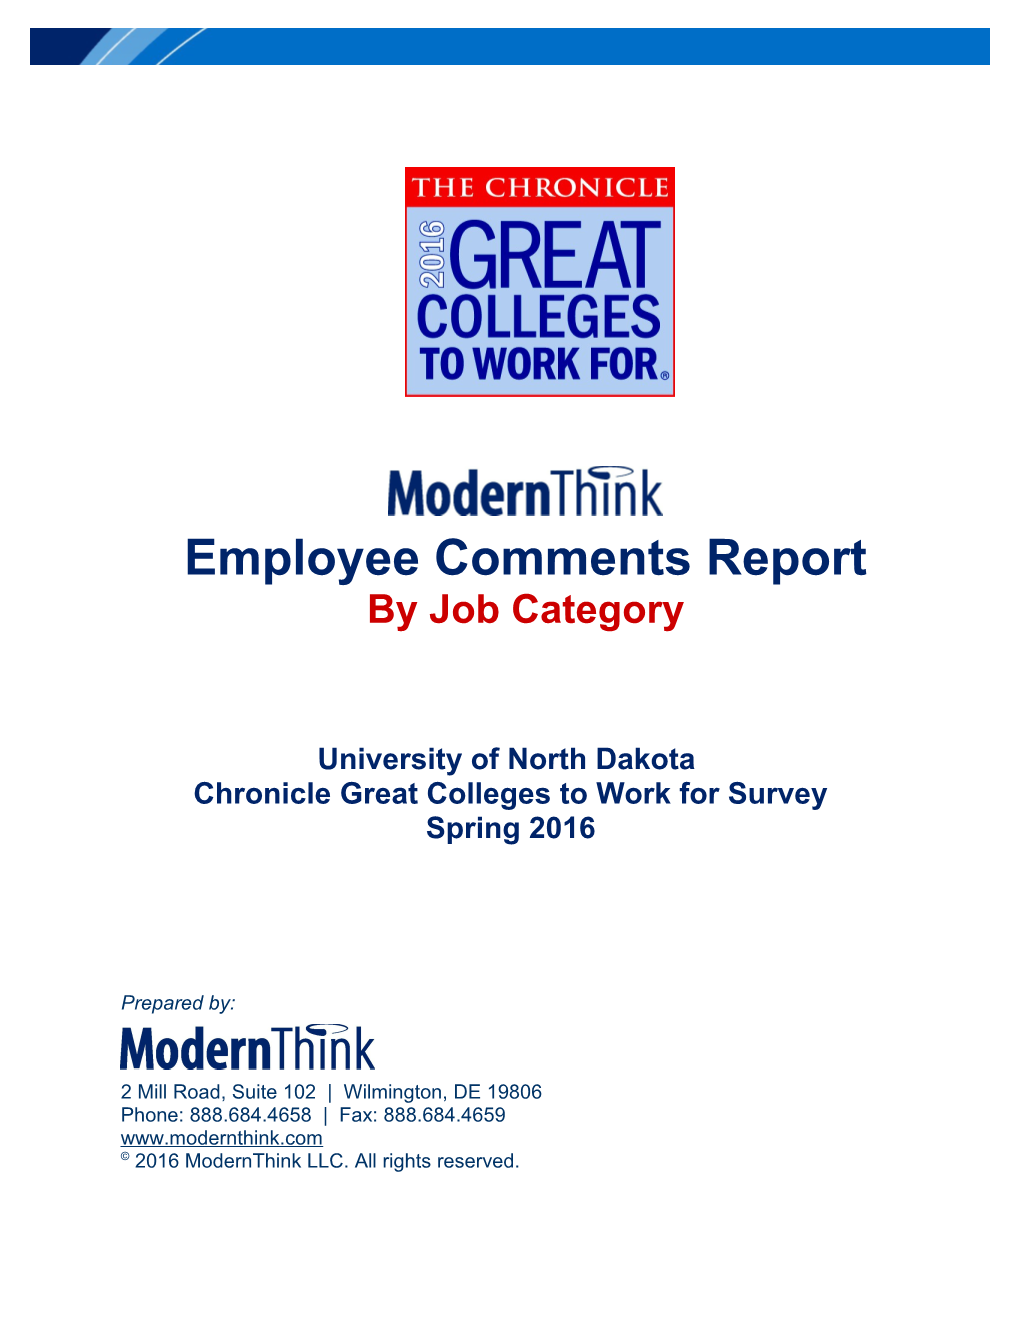 Employee Comments Report